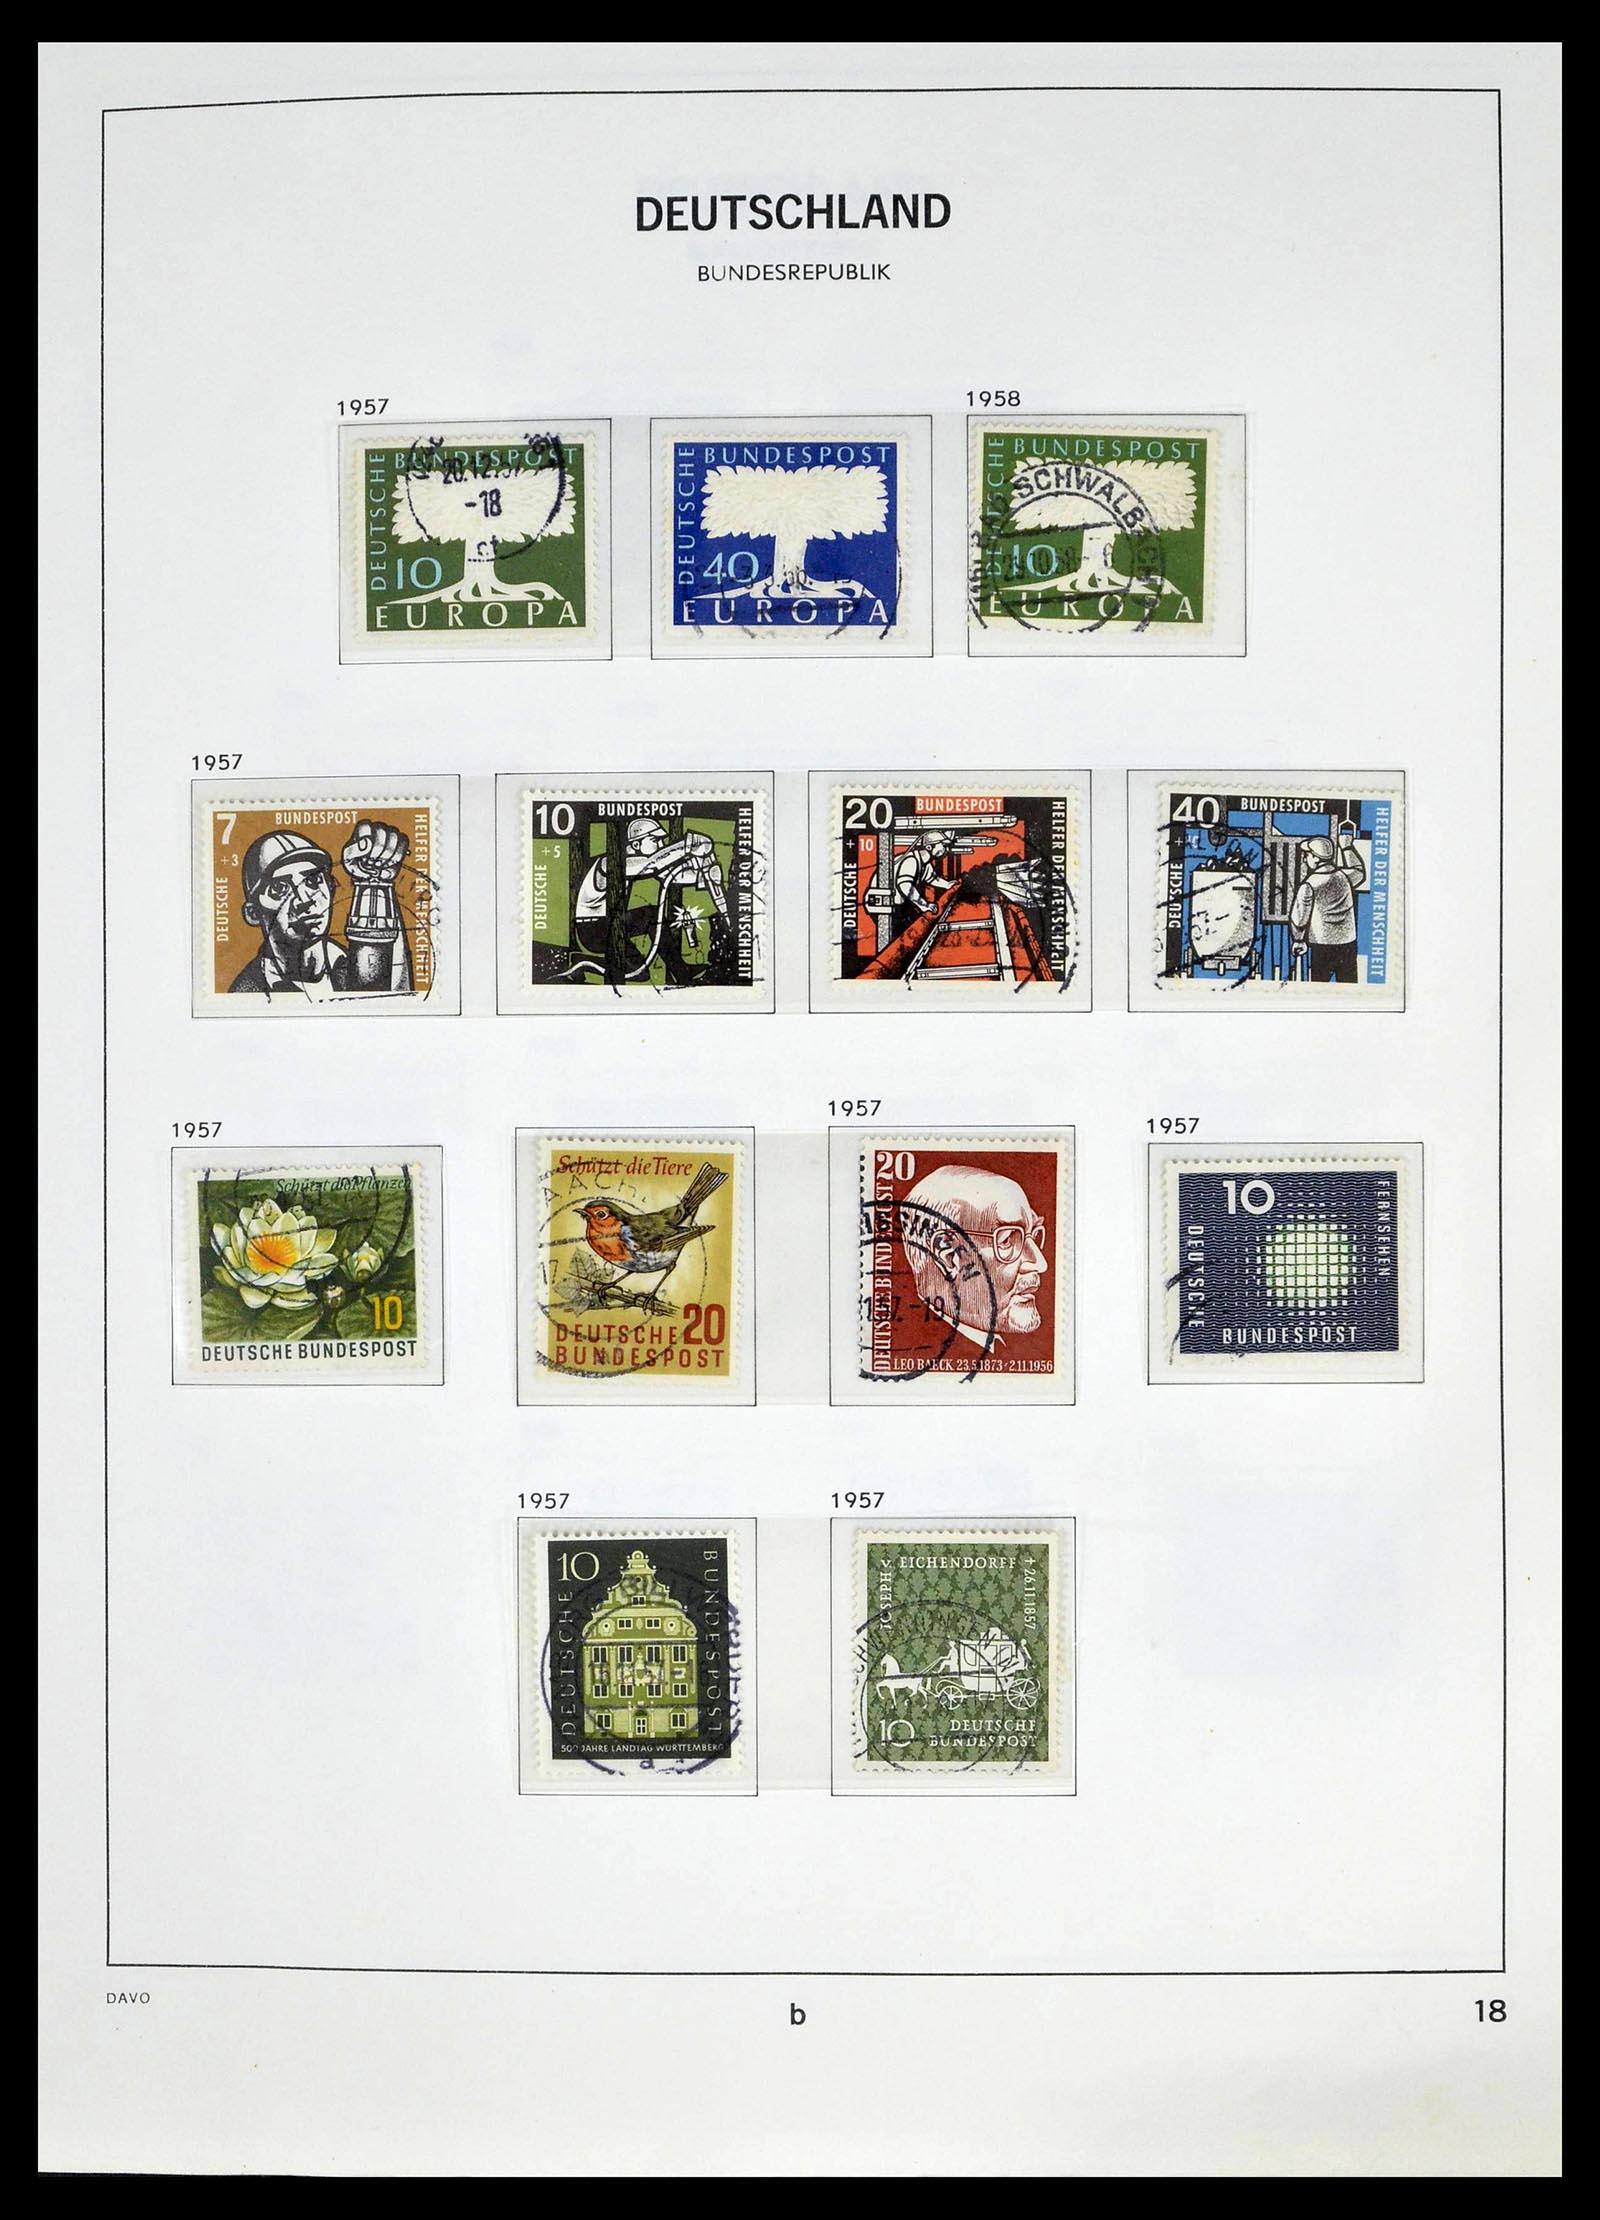 39326 0012 - Stamp collection 39326 Bundespost 1949-2003.